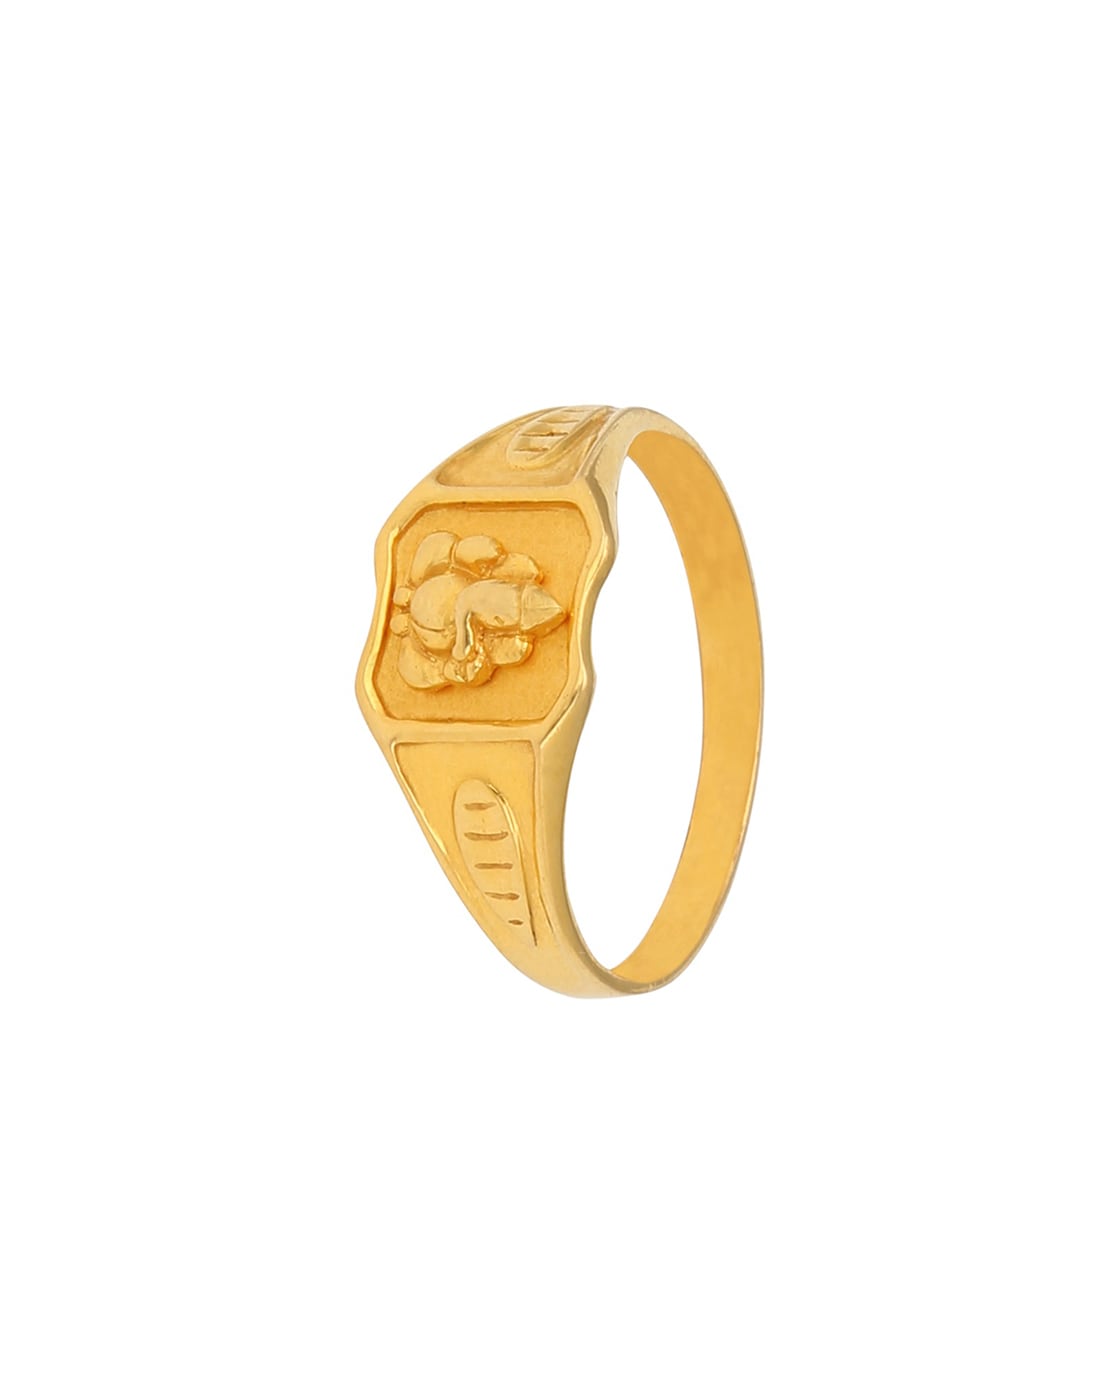 Mens gold ring designs latest with price and weight ll Men's jewelry  collection.. - YouTube